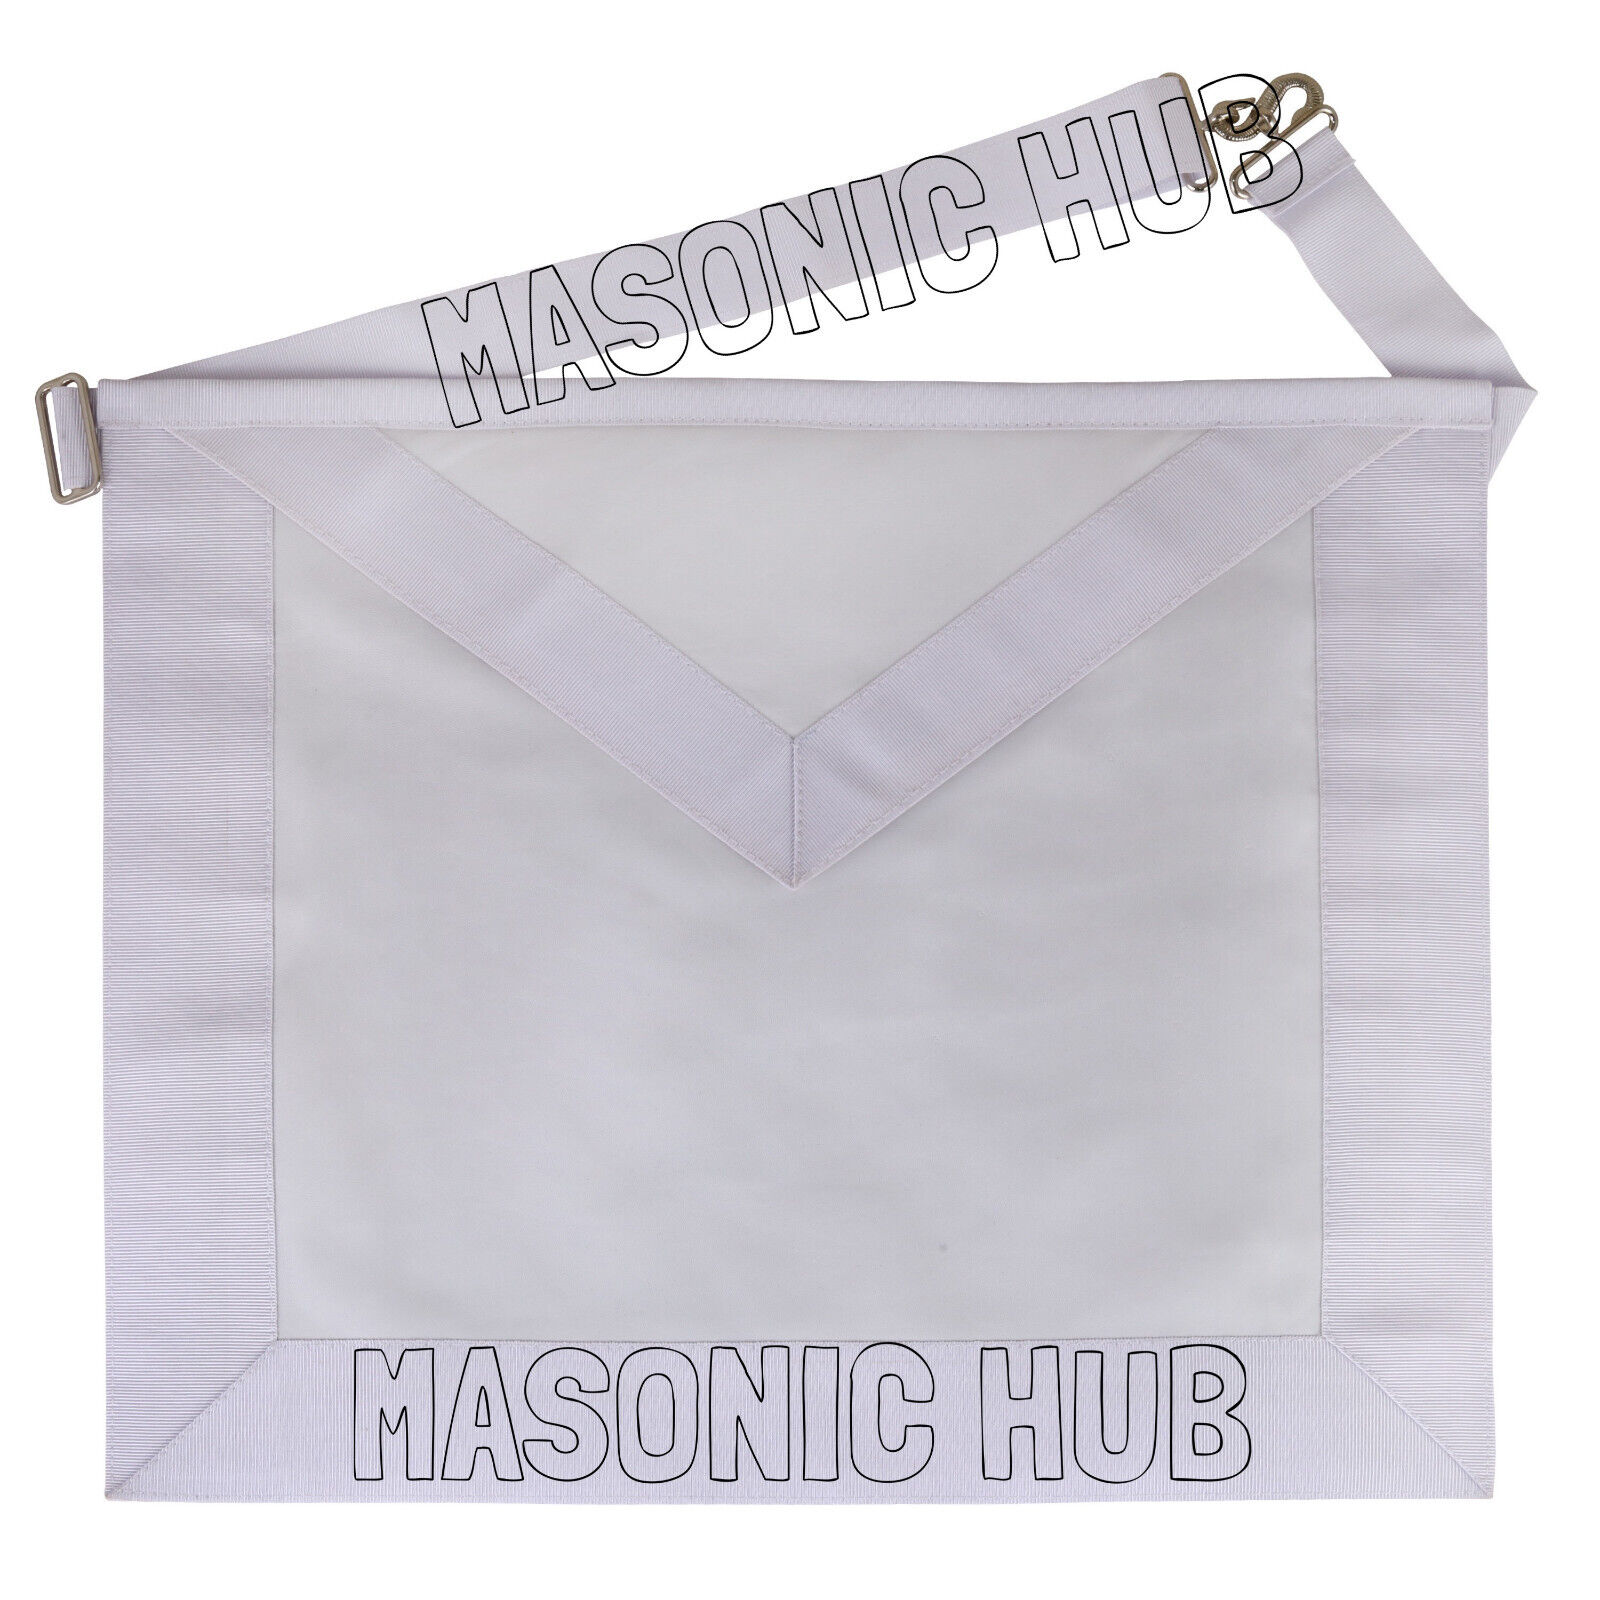 MASONIC CANDIDATE / ENTERED APPRENTICE SHEEP LEATHER APRON ALL WHITE